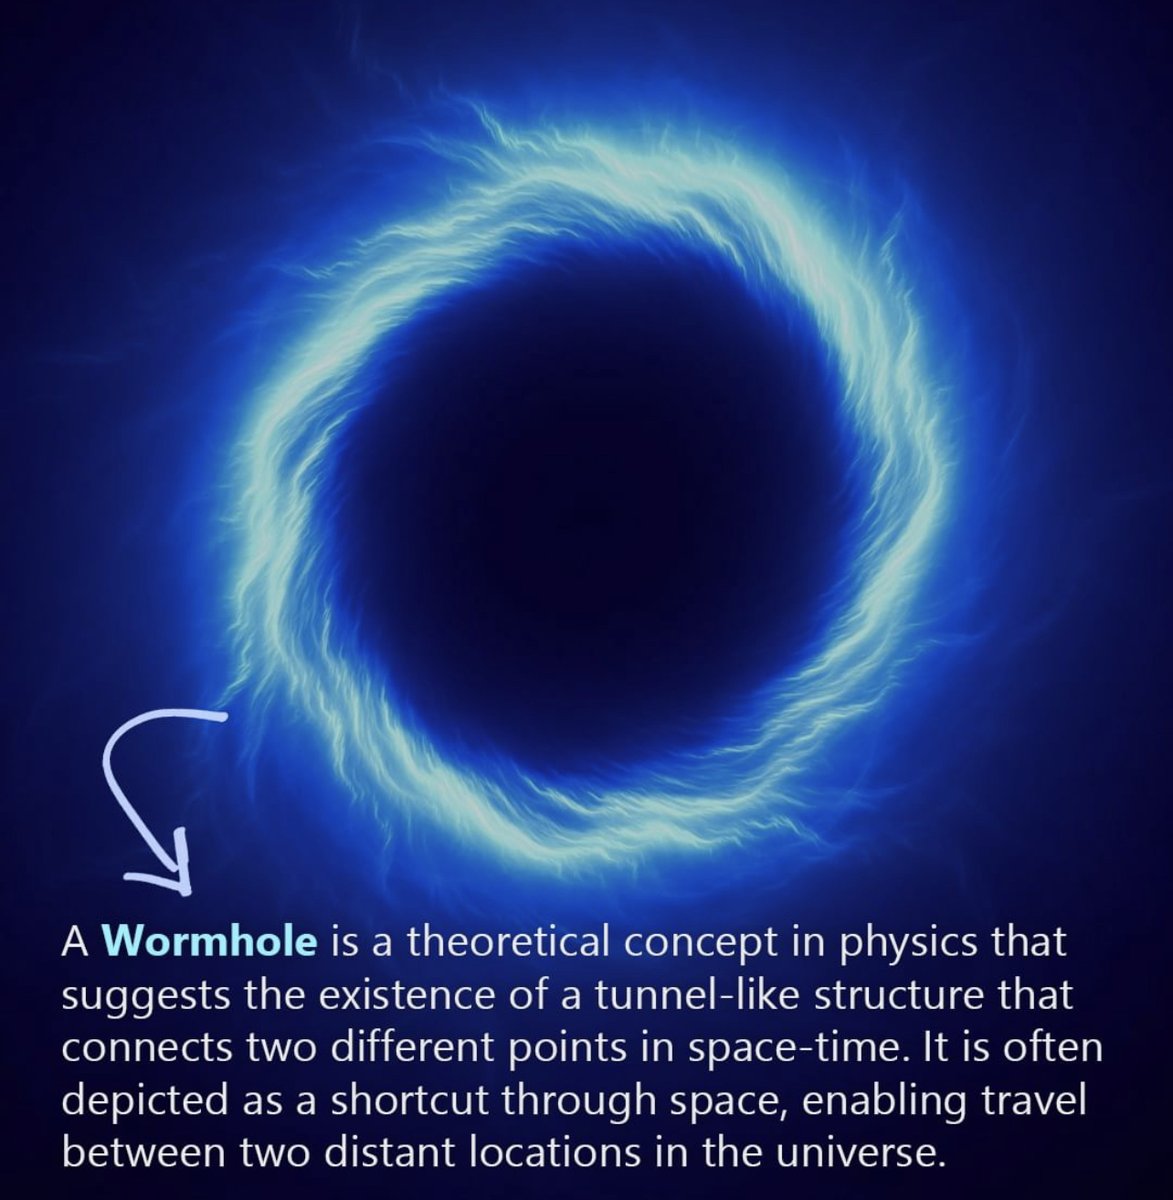 The equations behind Einstein's theory of space-time and general relativity includes wormholes, but none have ever been found in nature. Why? 

#roddenberry #SciFiThought #Science